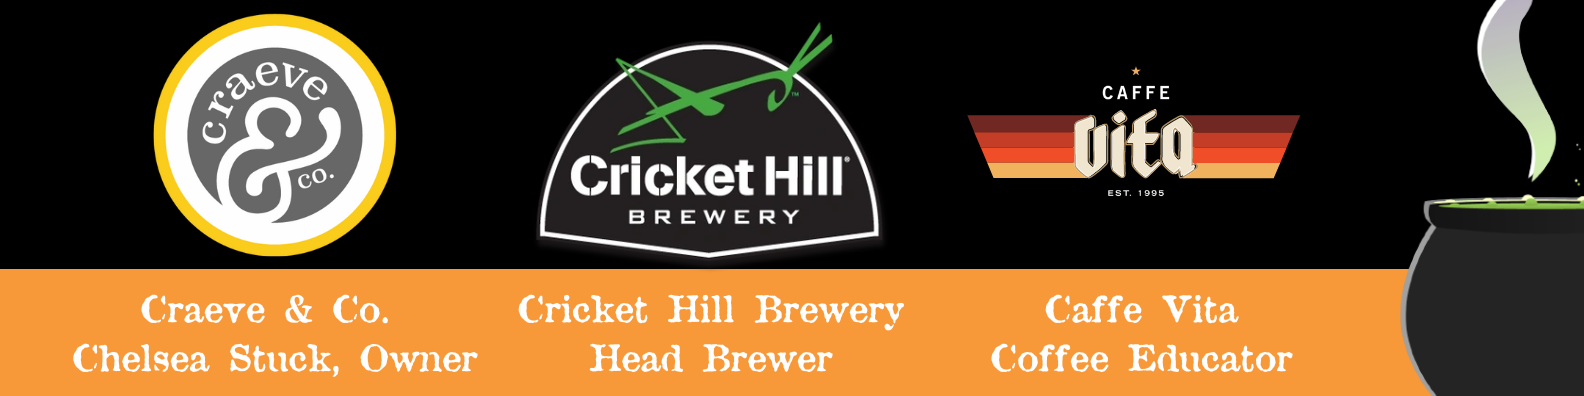 Speakers - Chelsea Stuck (Crave & Co), Head Brewer (Cricket Hill Brewery), Coffee Educator (Caffe Vita)